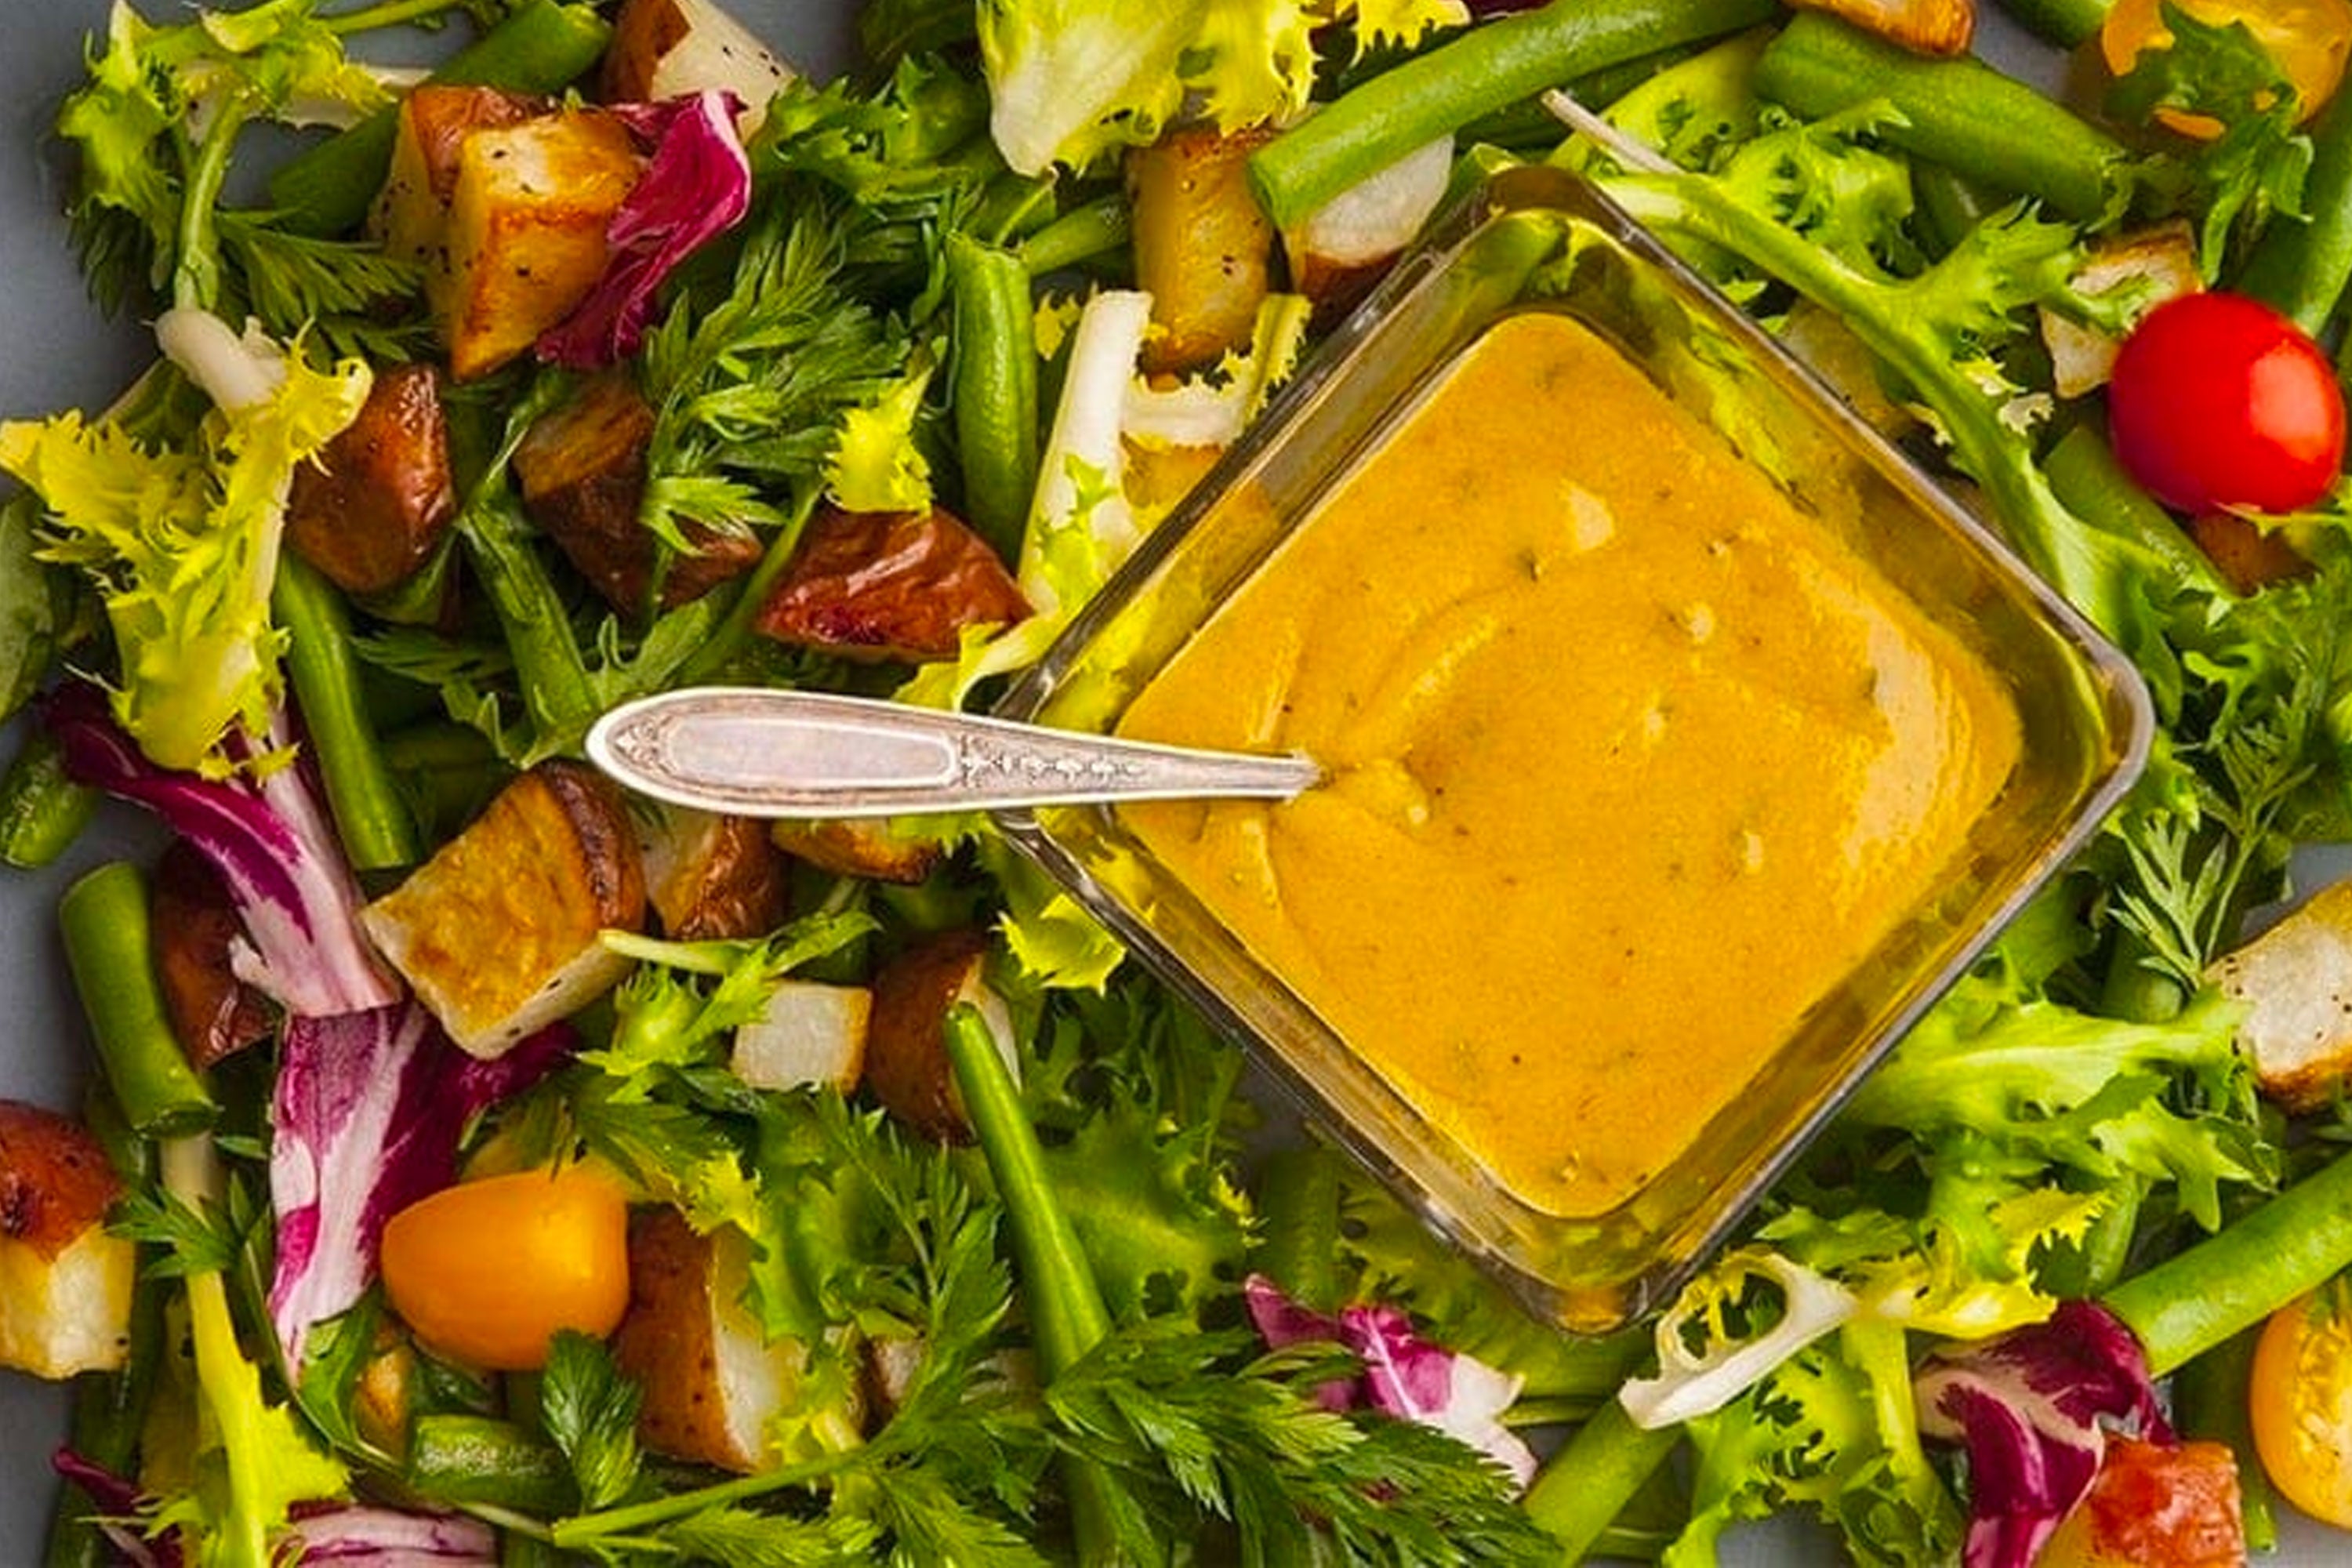 Salad with diamond container of Spiced Honey Mustard Dressing